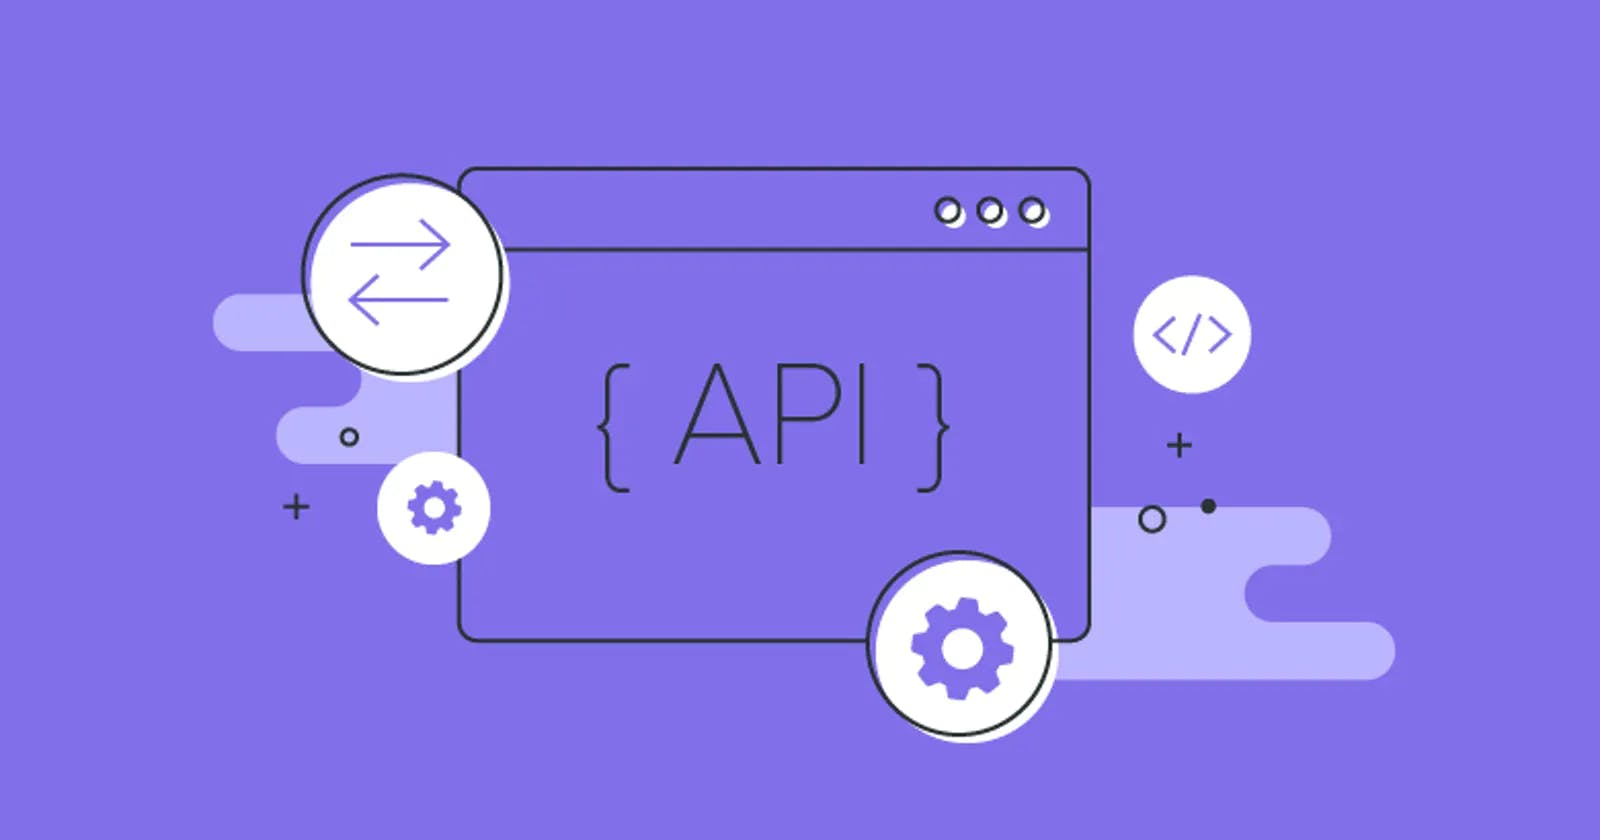 All you need to know about API's